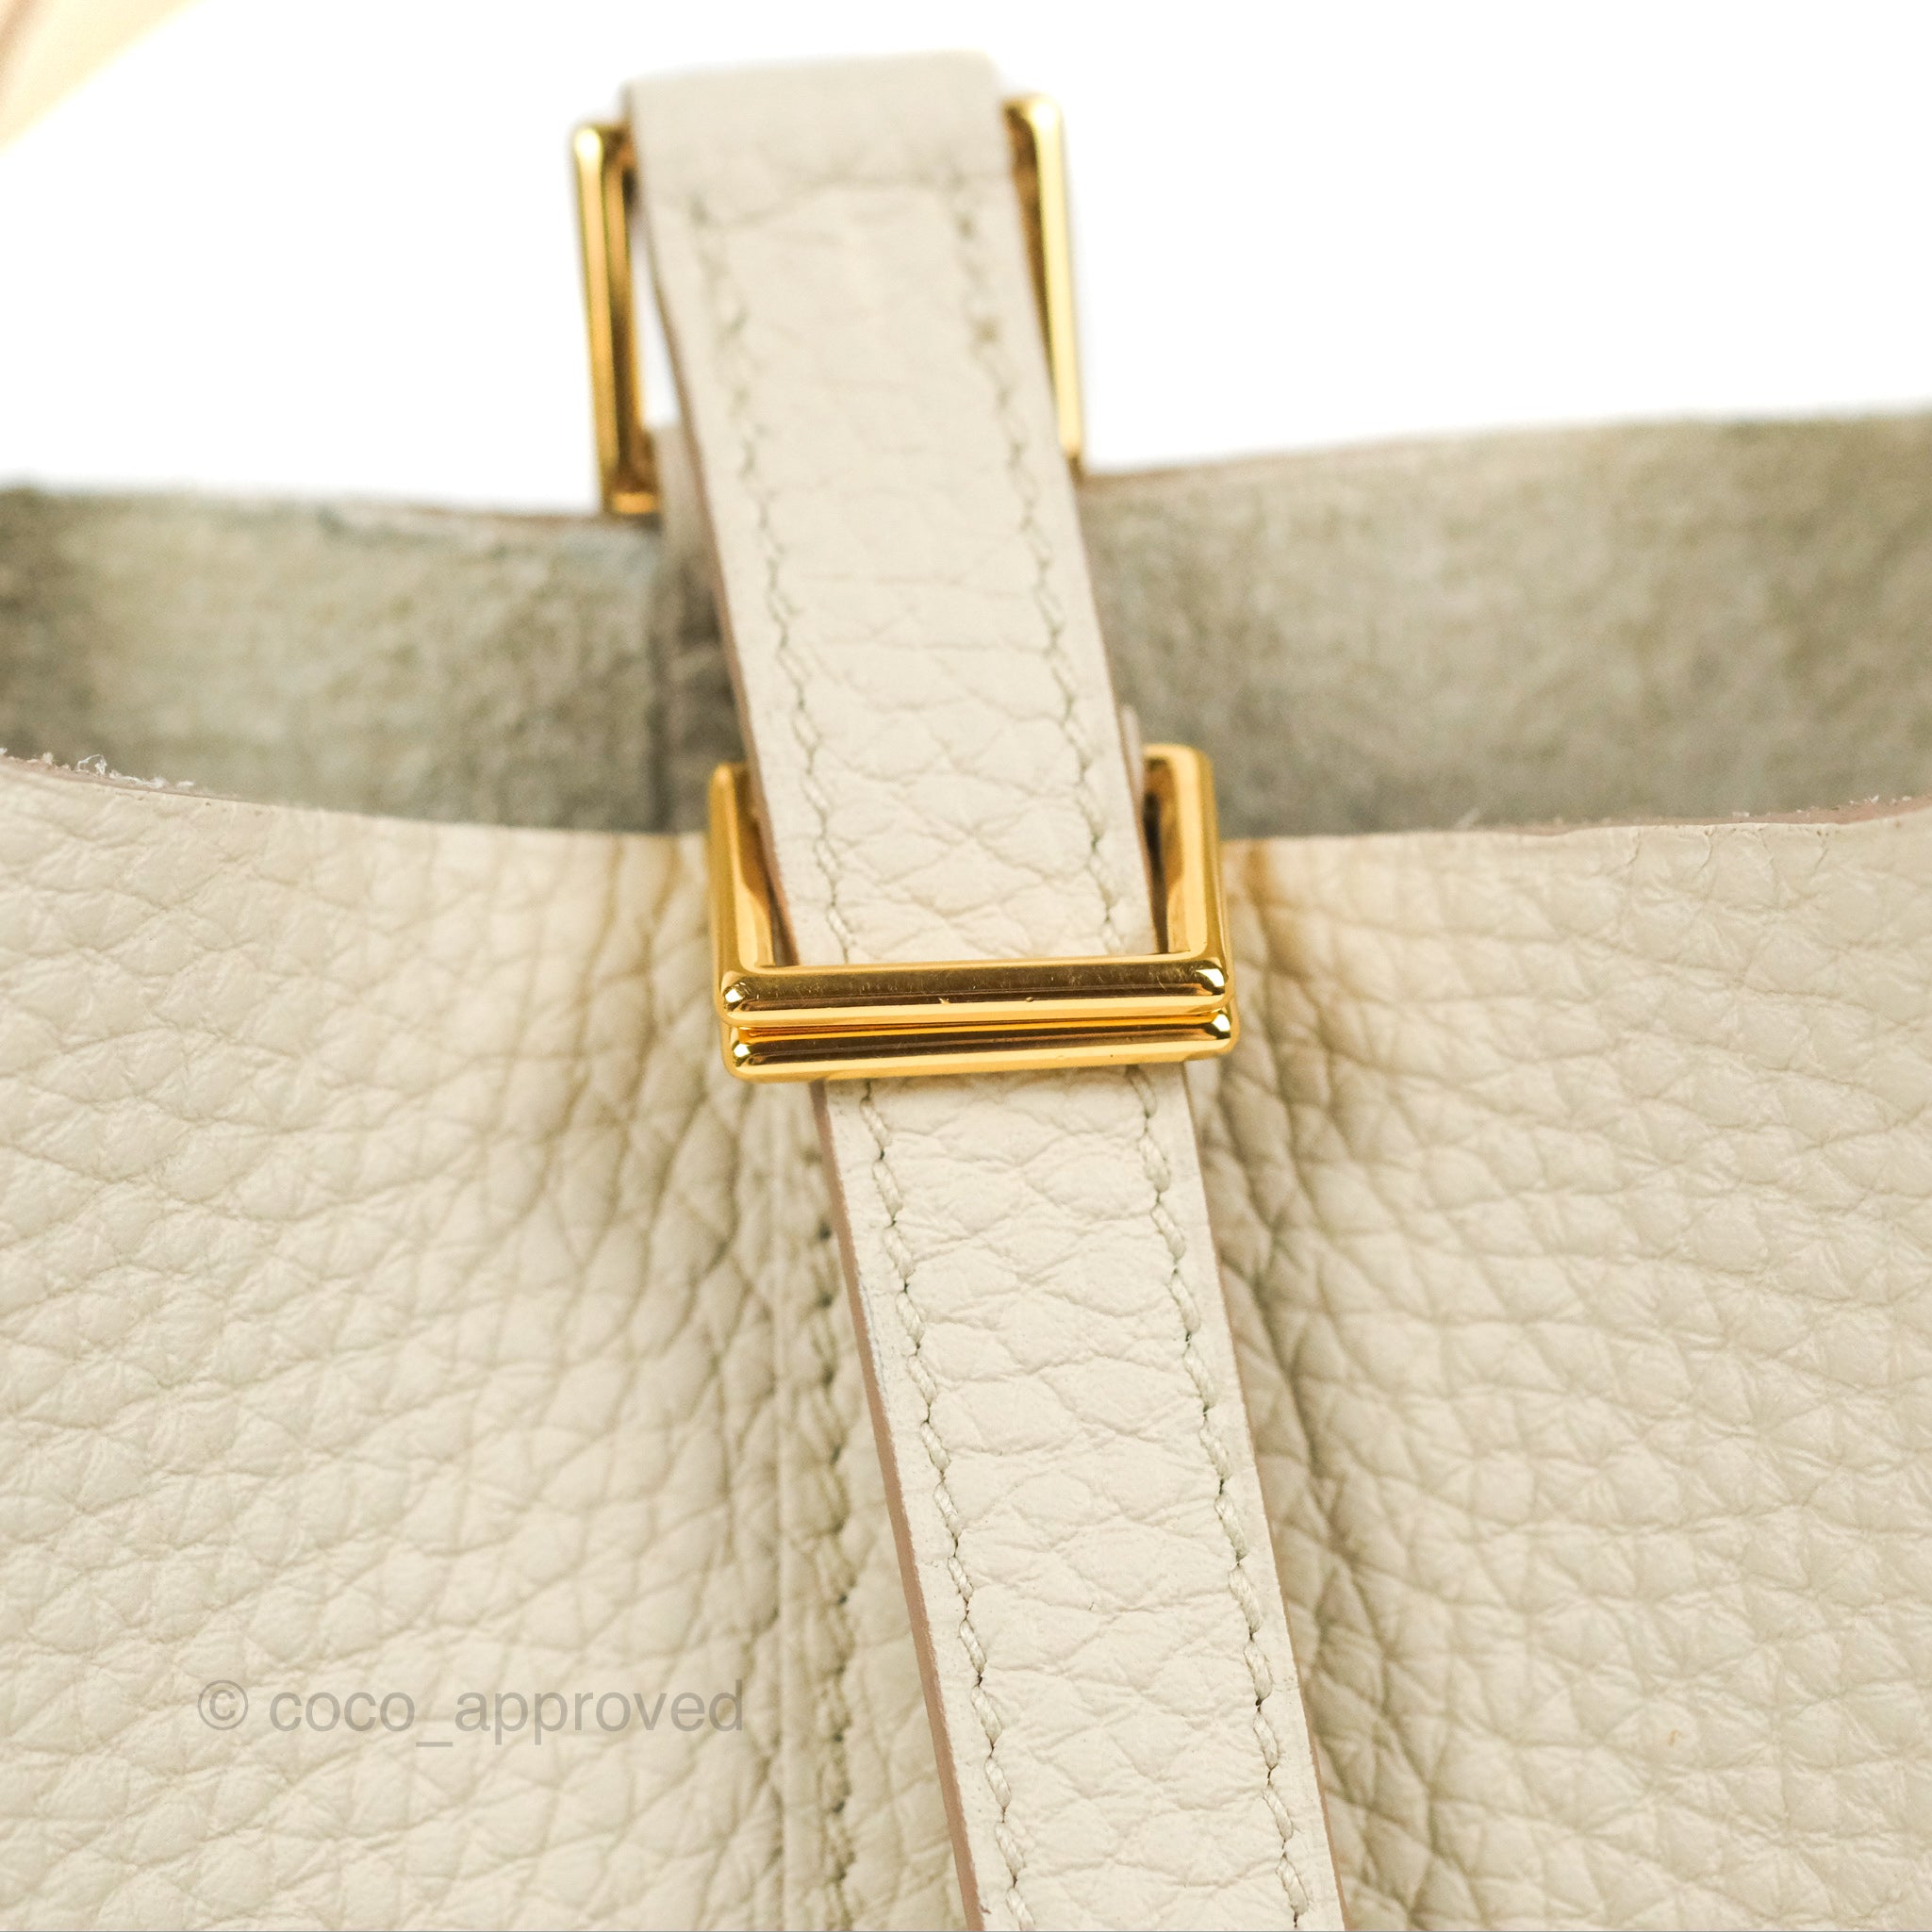 Hermes In the Loop 18 Beton Clemence with Gold-plated hardware